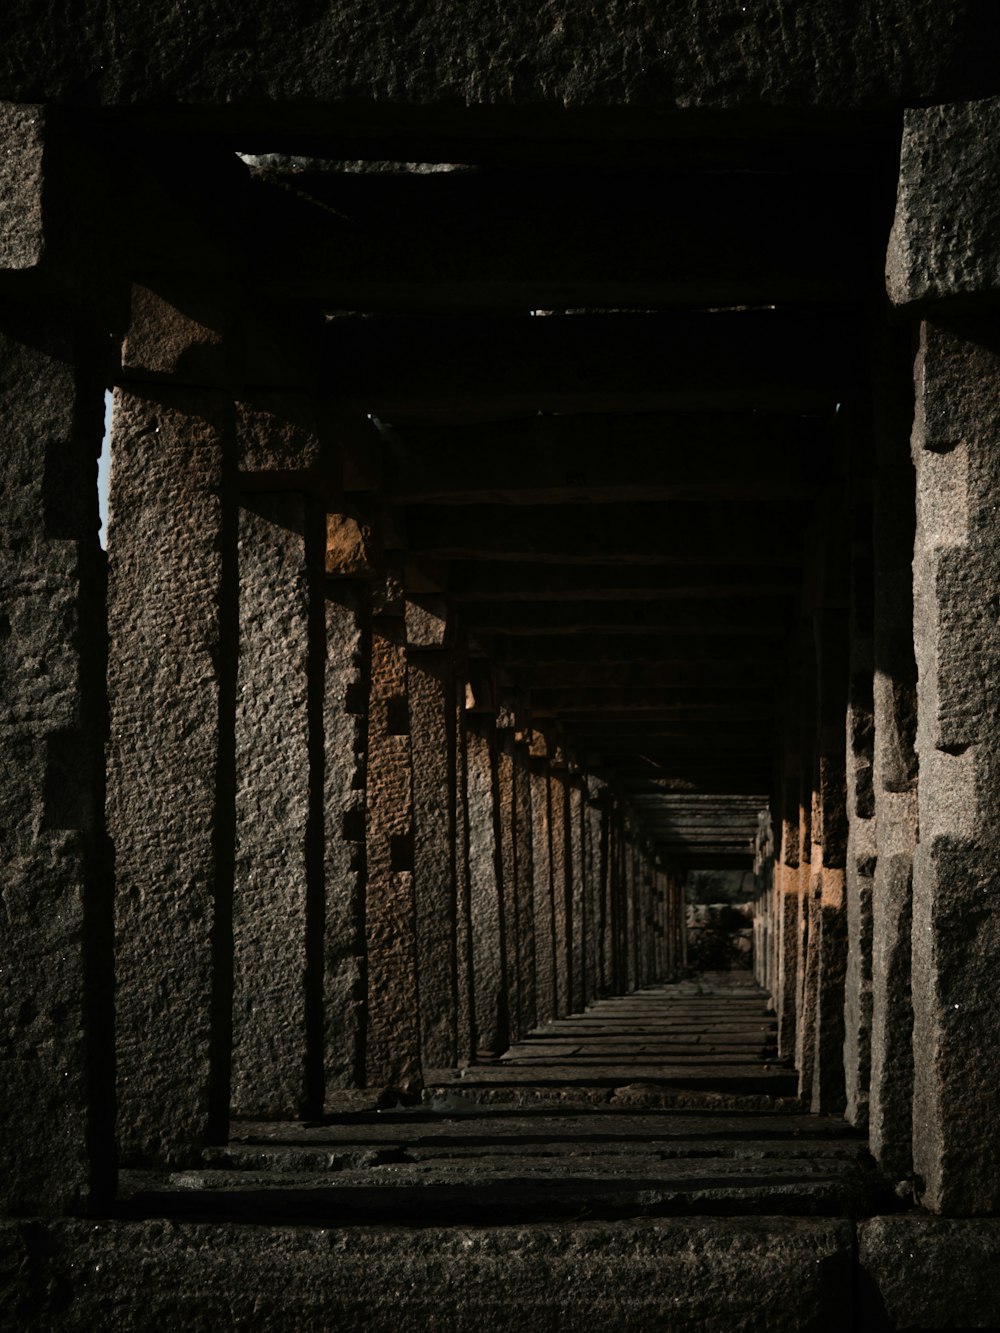 a long row of stone pillars in a building